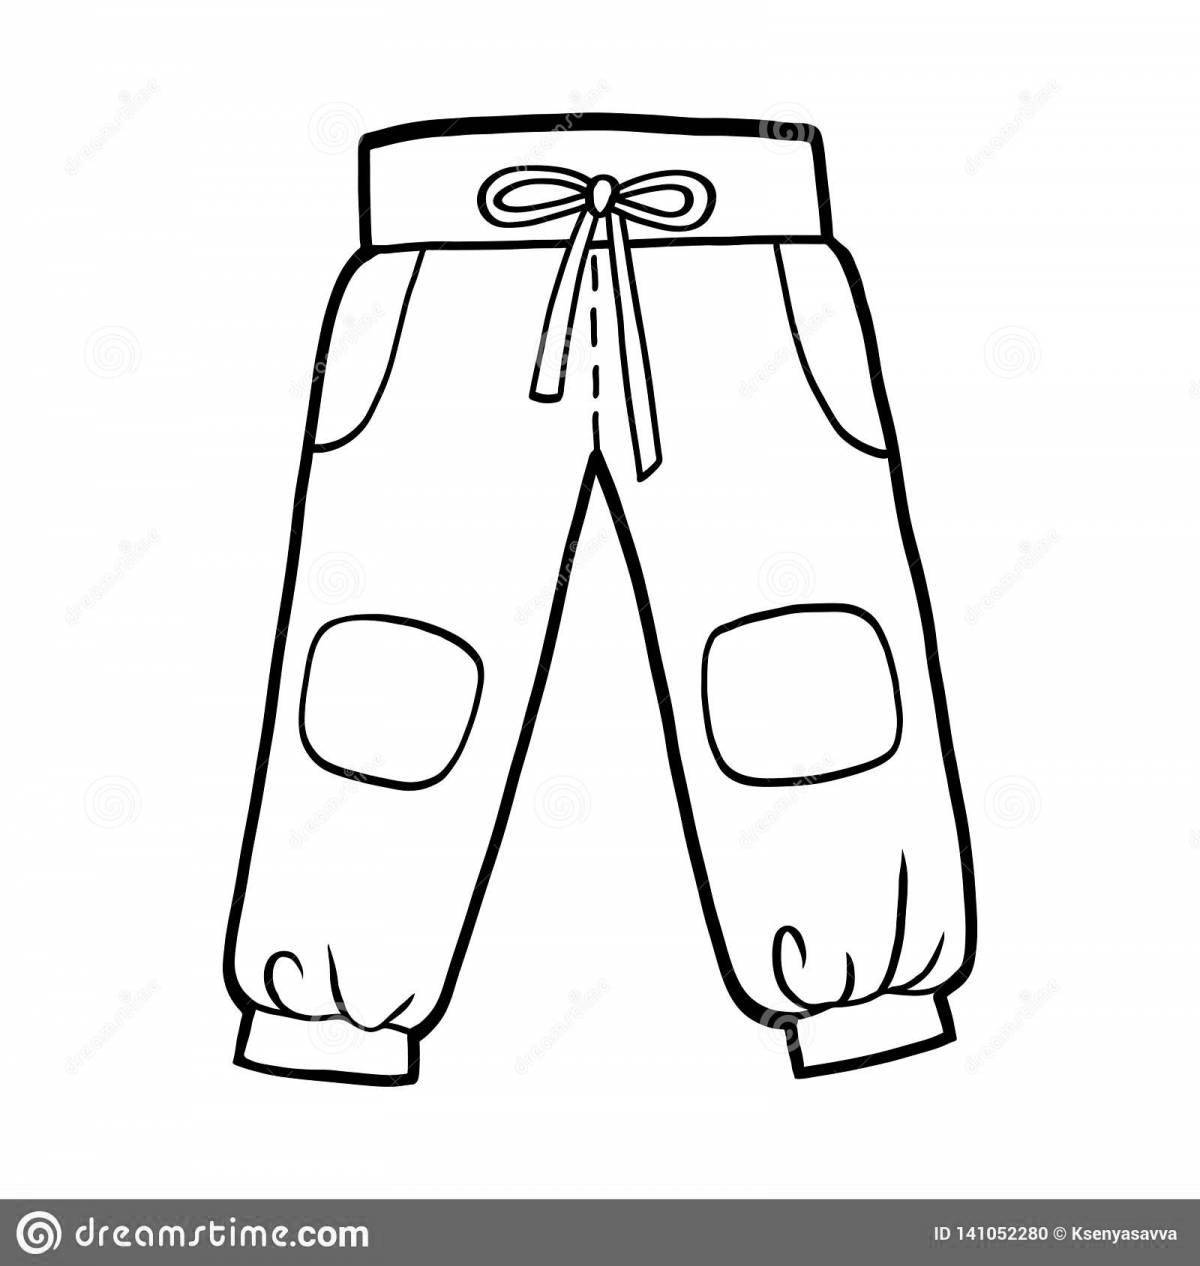 Coloring book outstanding sweatpants